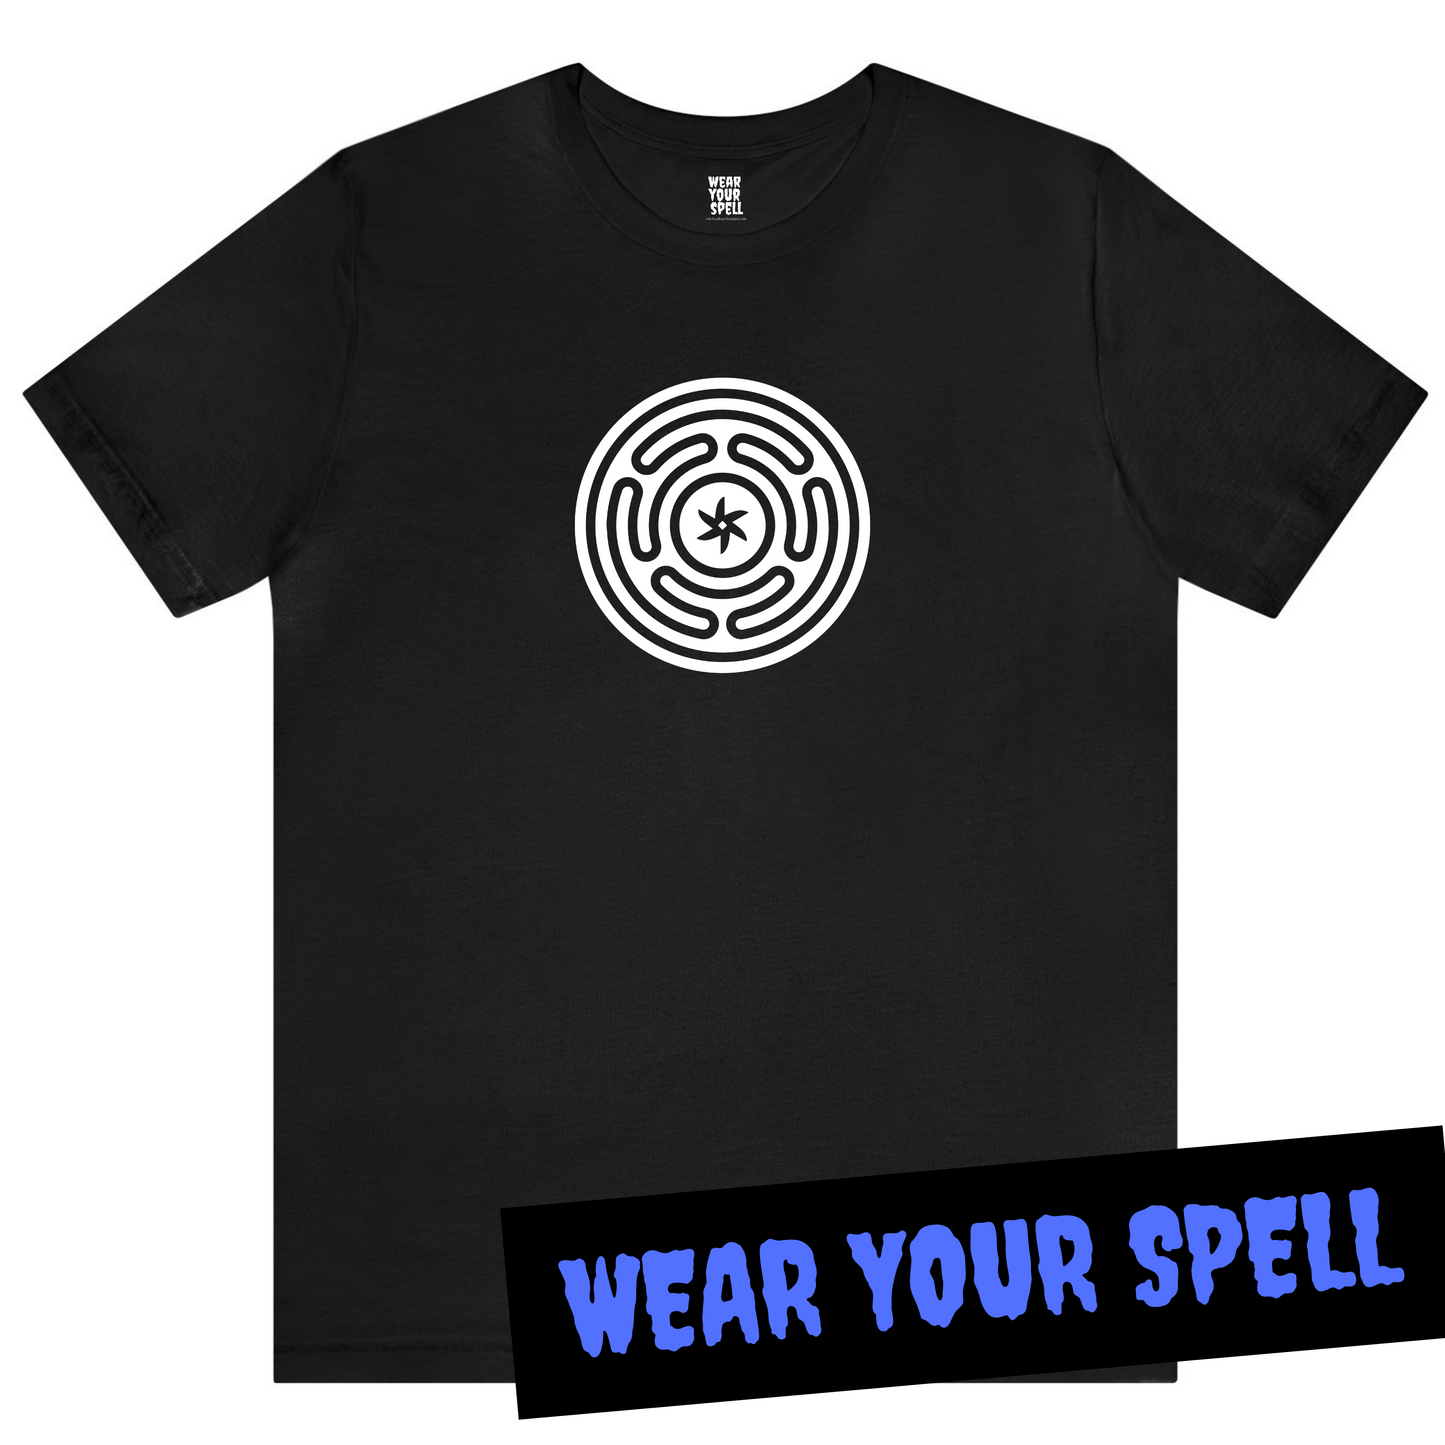 WEAR YOUR SPELL Witch T-shirt. Hekate's Wheel Protection Spell. Magickal correspondence: Hekate's Wheel, Mugwort & Moon Water